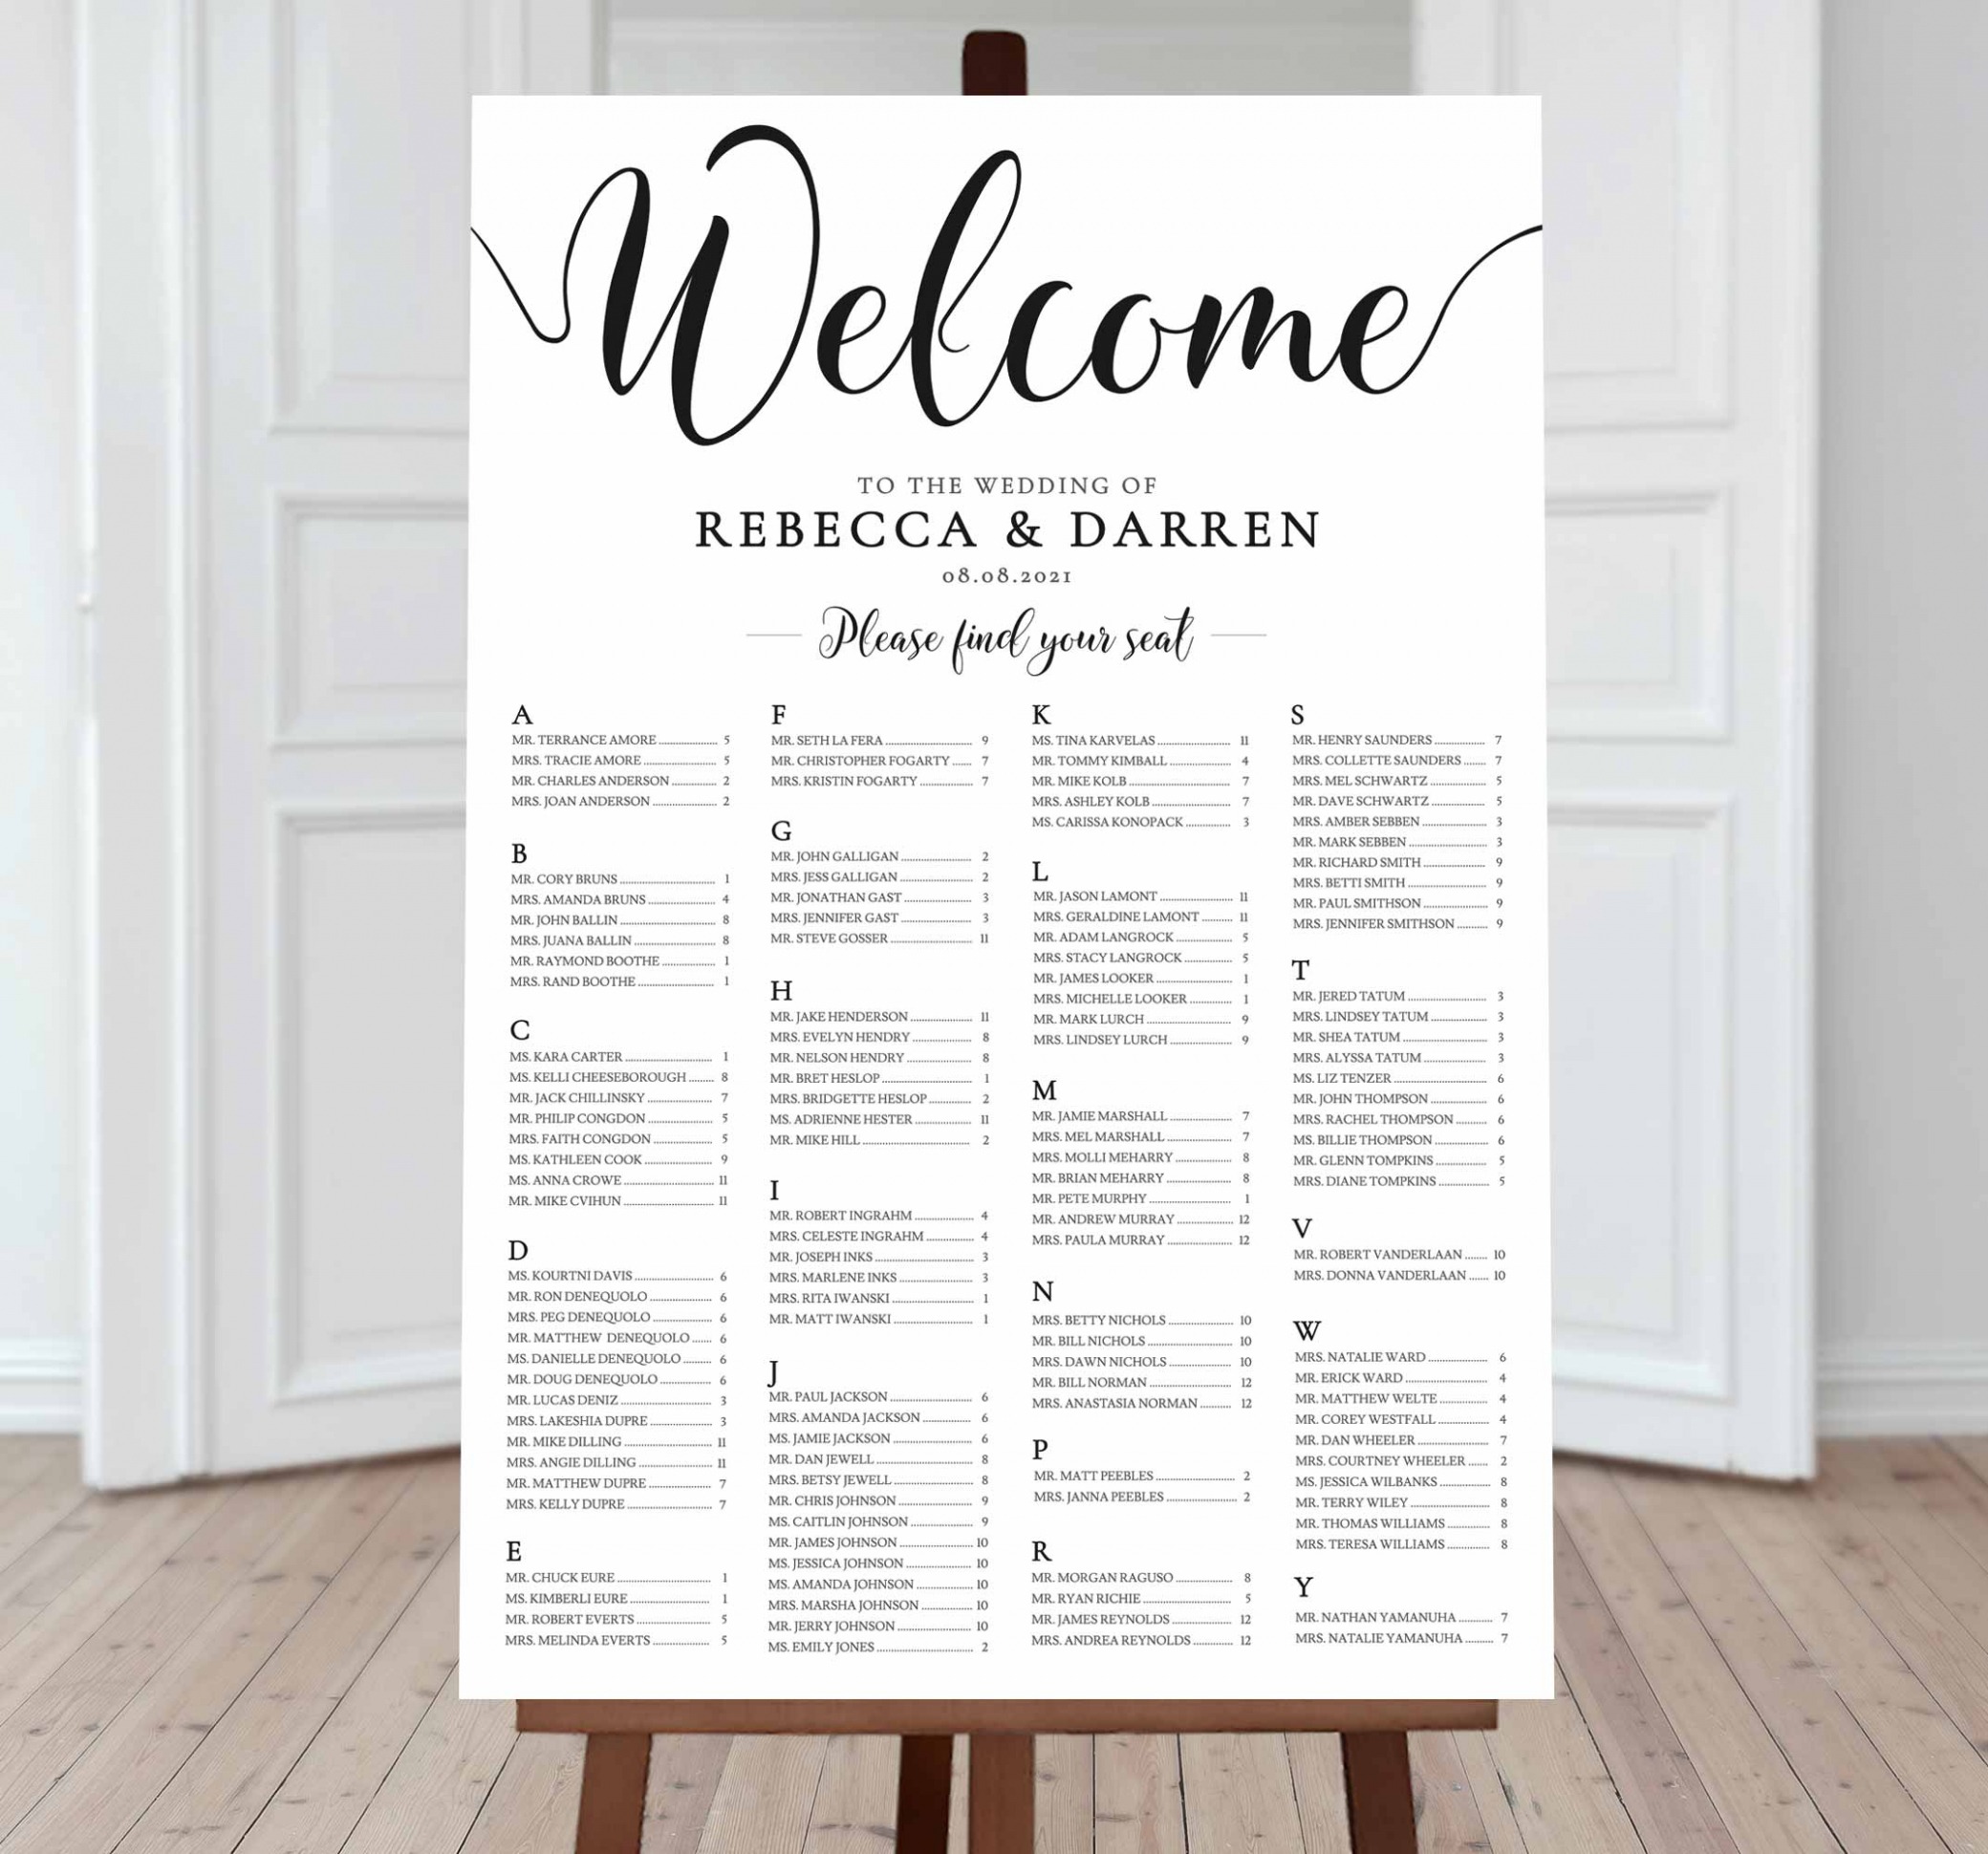 Sample Wedding Seating Chart Alphabetical Order Template Excel